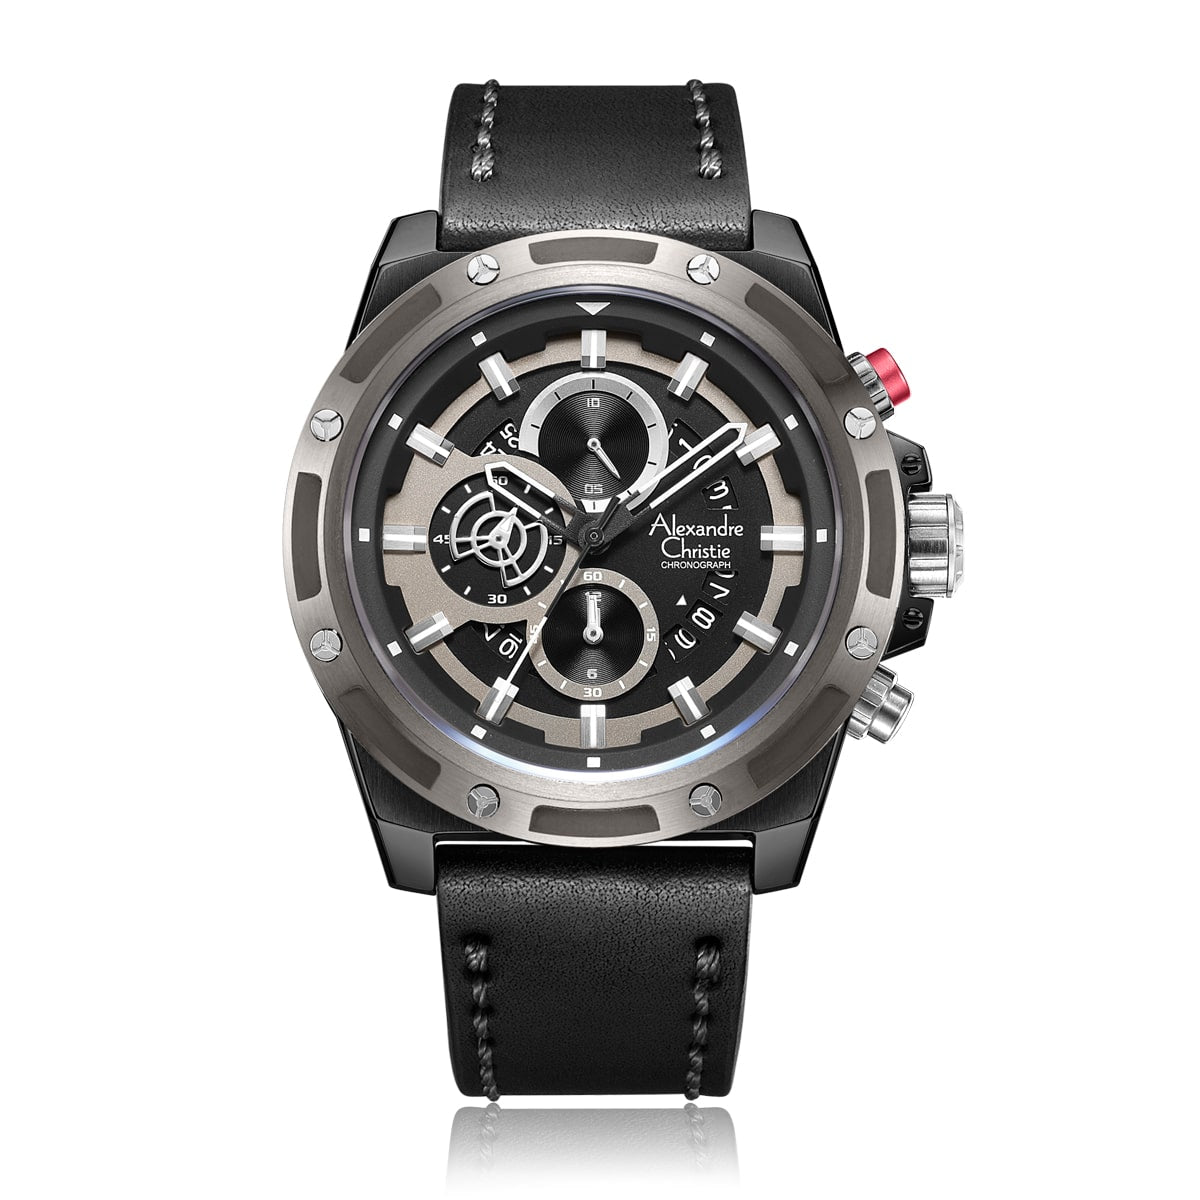 AC 6506 MCL Chronograph Watch For Men – Black Colorway-6506MCLEPBA